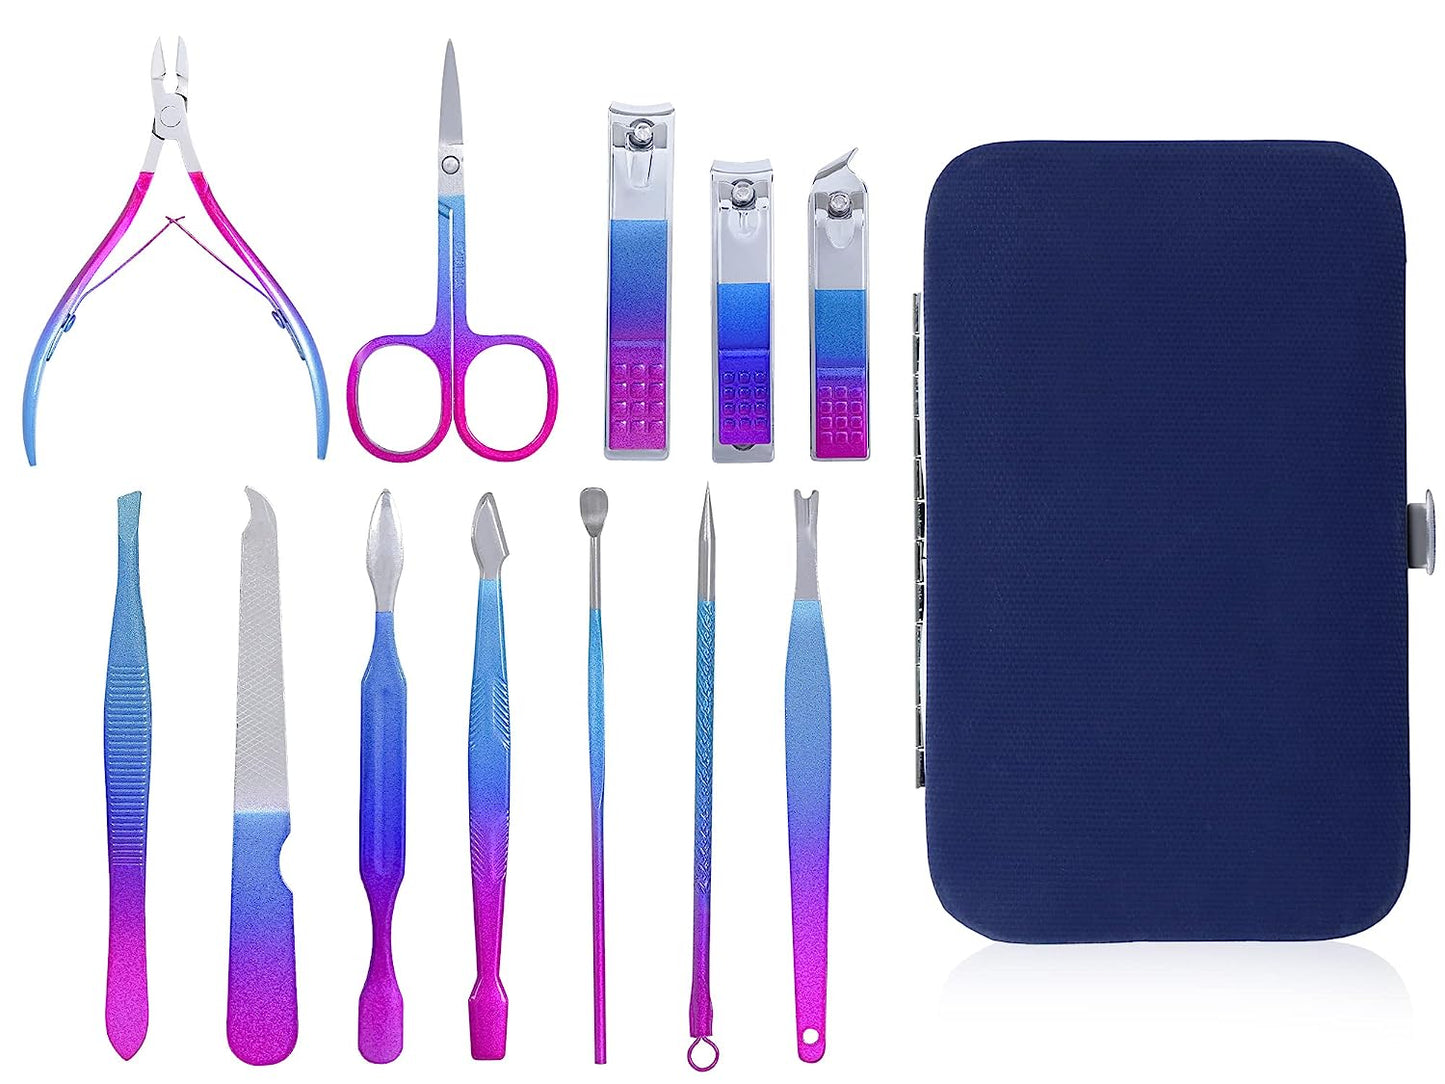 DOCOSS-12 IN 1 Stainless Steel Proffesional Manicure Pedicure Set Nail Cutter ,Scissors Grooming Kit with Peeling Knife, Nail Cleaning Knife, Acne needle, Blackhead Tool With Leather Travel Case